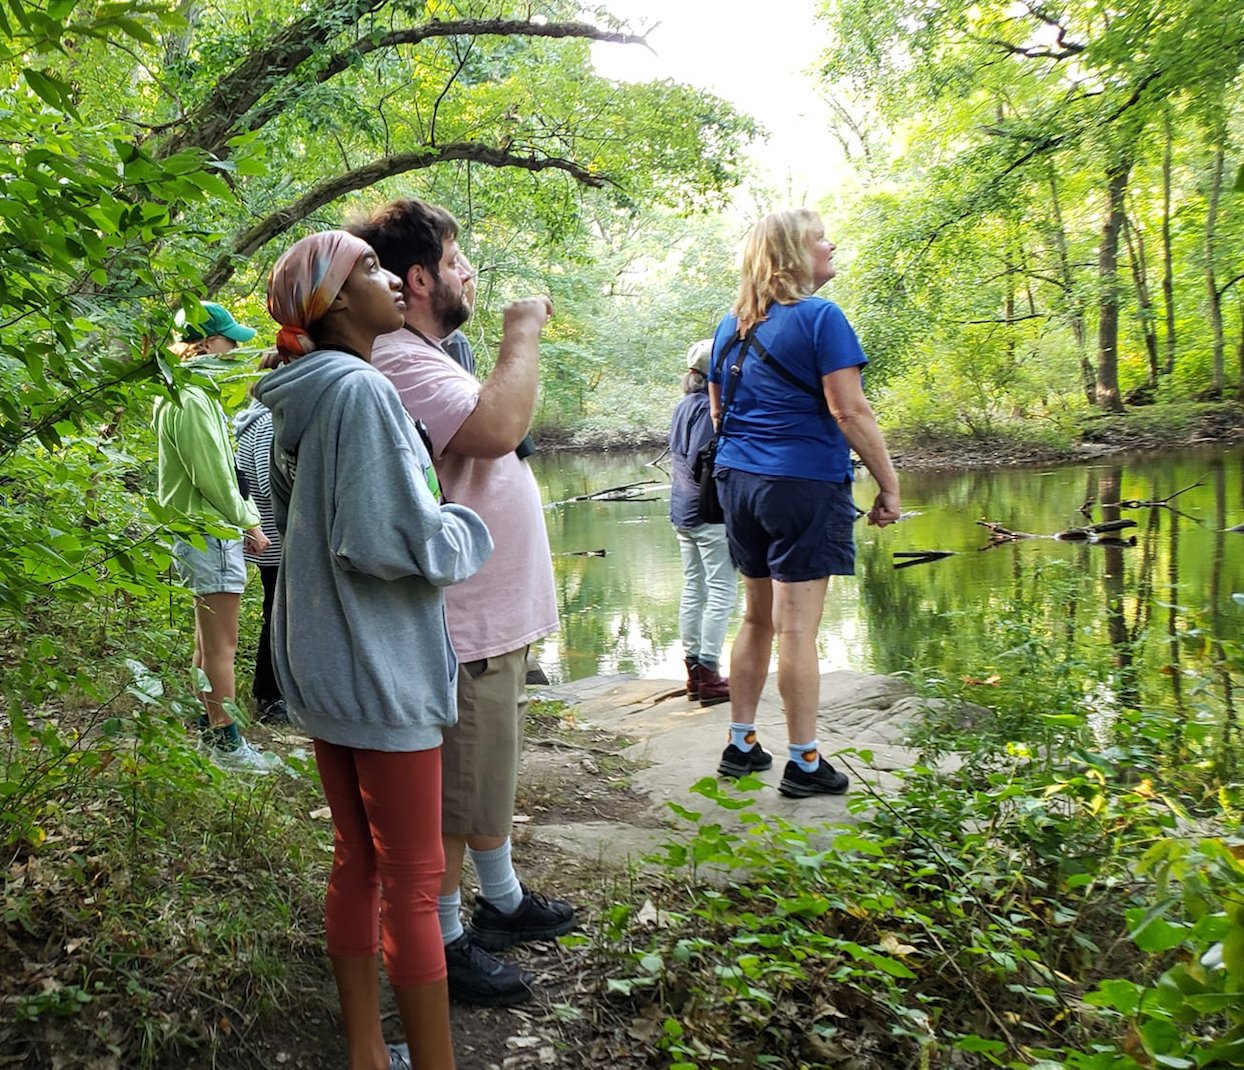 The goal of the Blackstone Valley Tourism Council’s Bird Walk is to see and hear local and migratory songbirds and waterfowl. Here, participants in September’s event watch and listen as they are guided along the Ten Mile River at Hunts Mills in Rumford, R.I. by an Audubon Society guide.